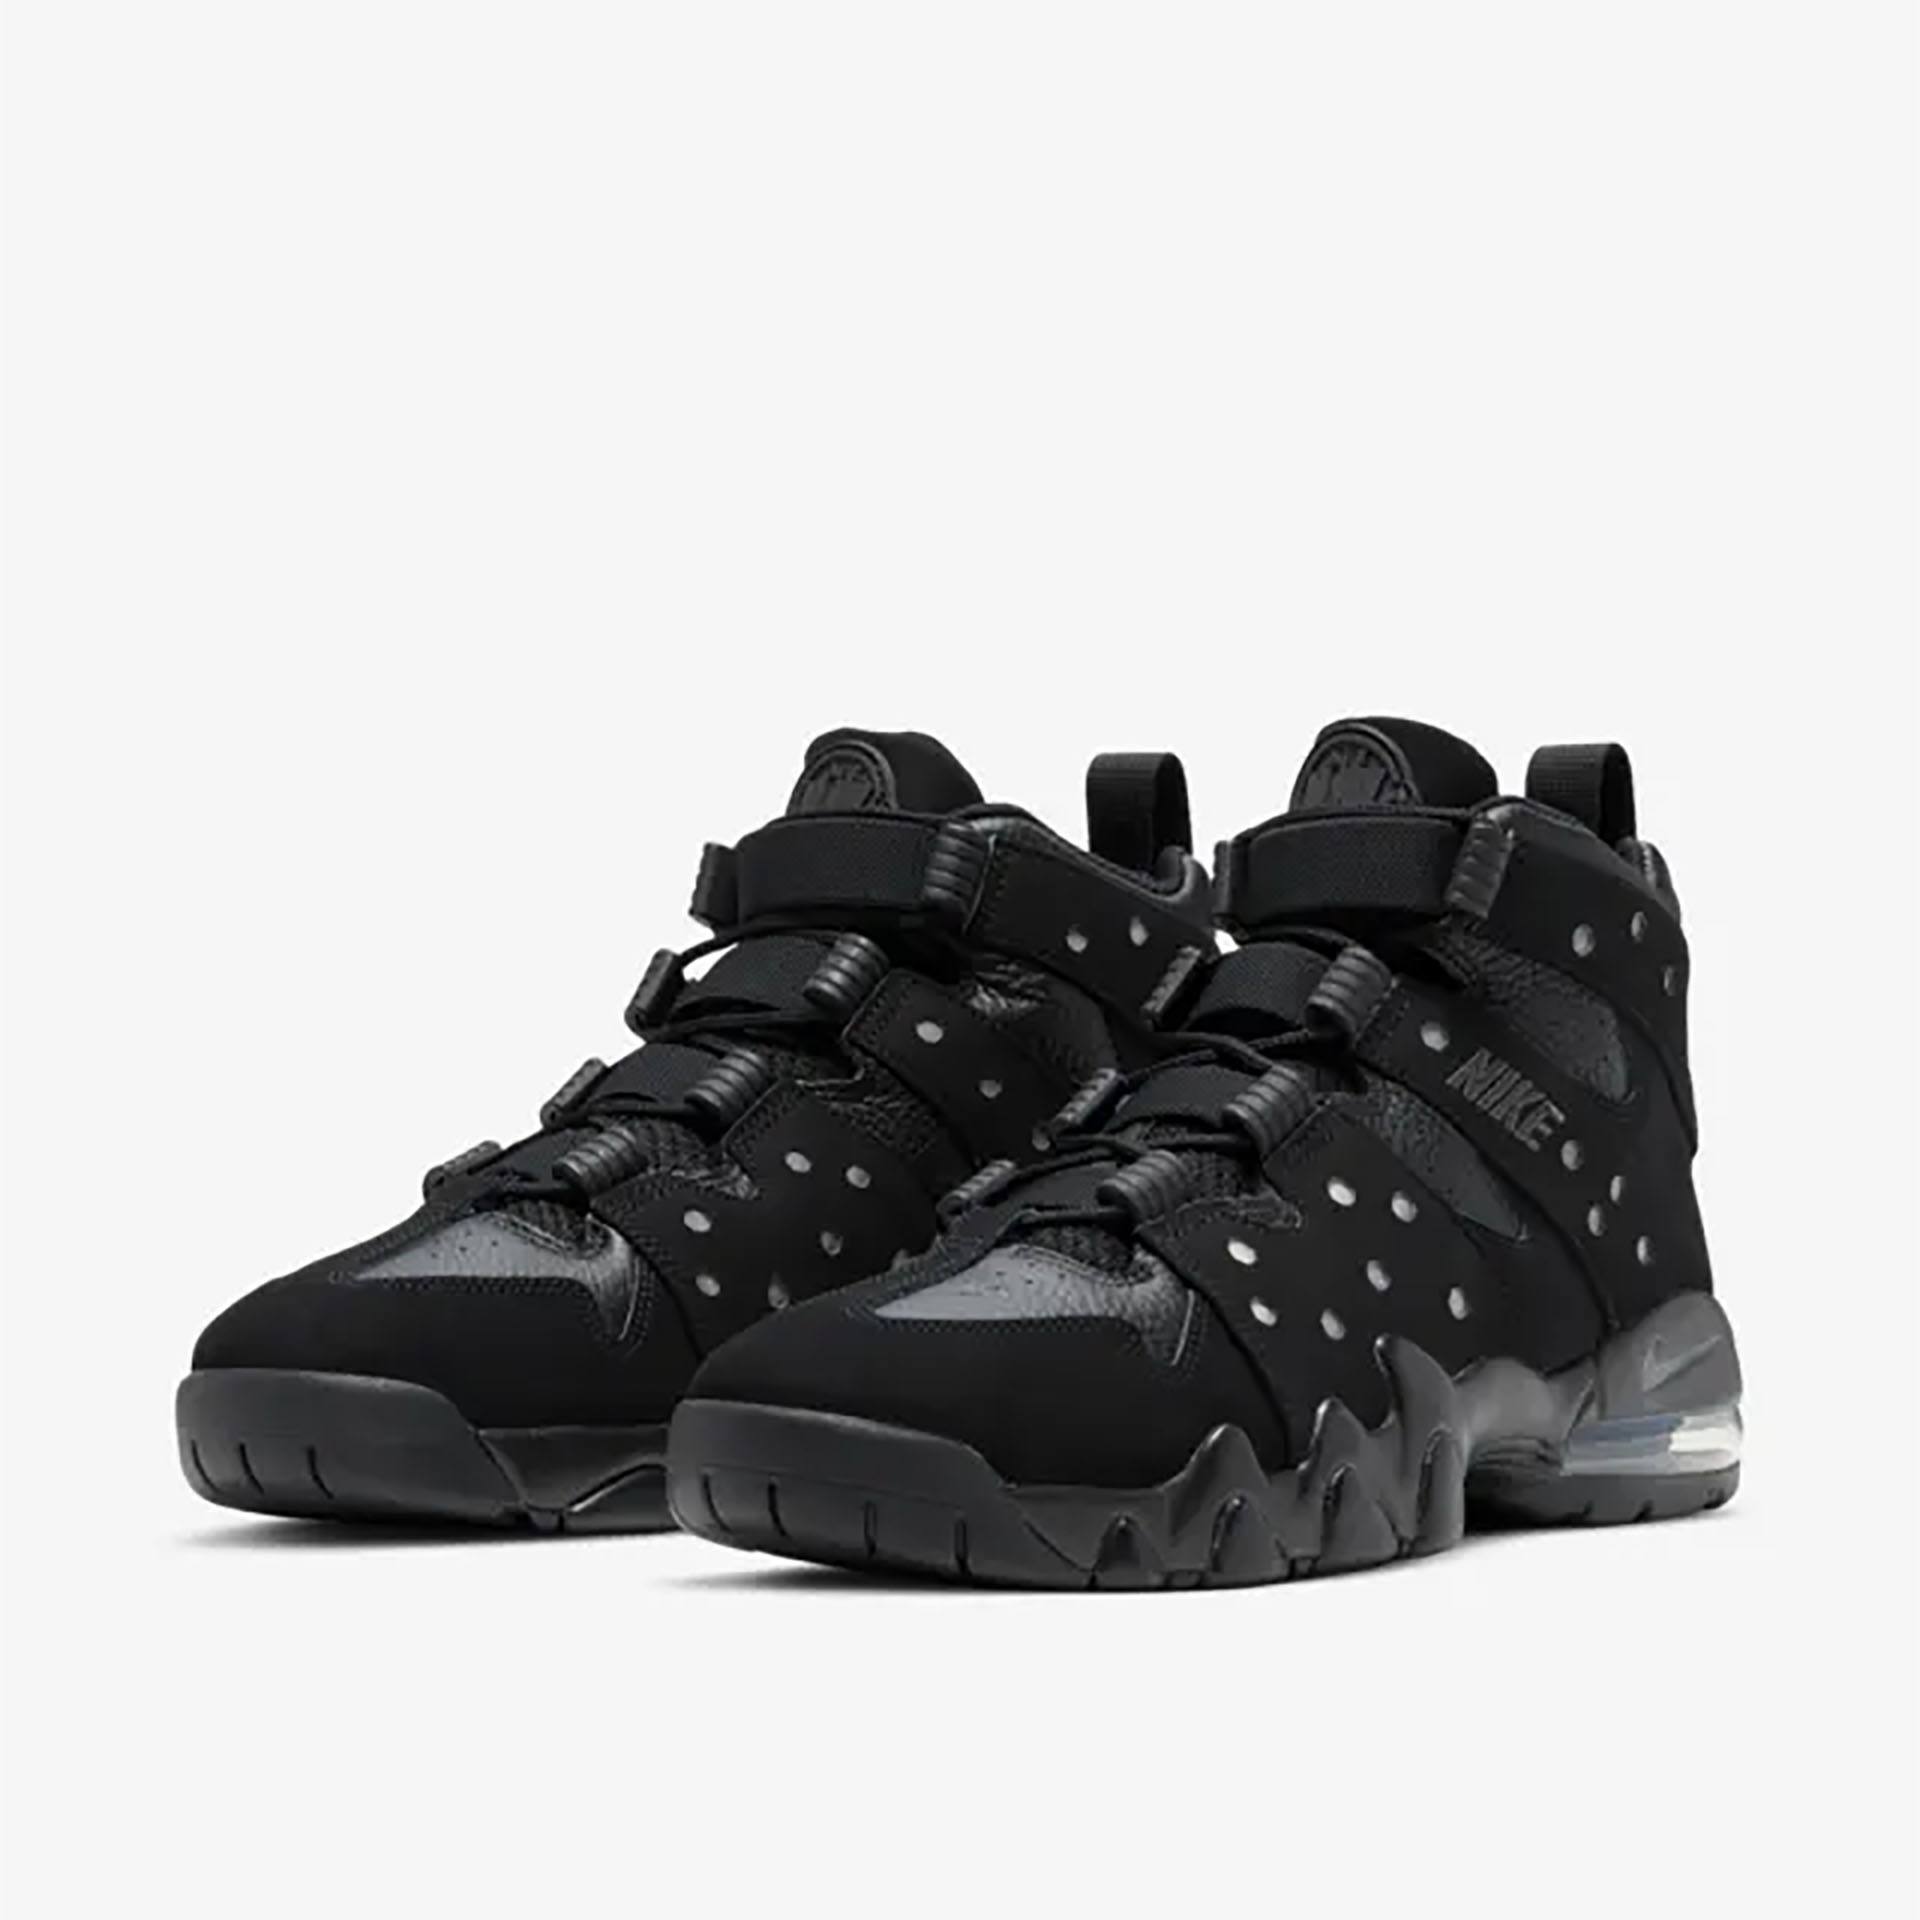 Opstå Læge Titicacasøen AIR MAX 2 CB '94 'Black and Metallic Silver' ｜ FLY BASKETBALL CULTURE  MAGAZINE ｜ バスケットボール ファッション・カルチャー マガジン